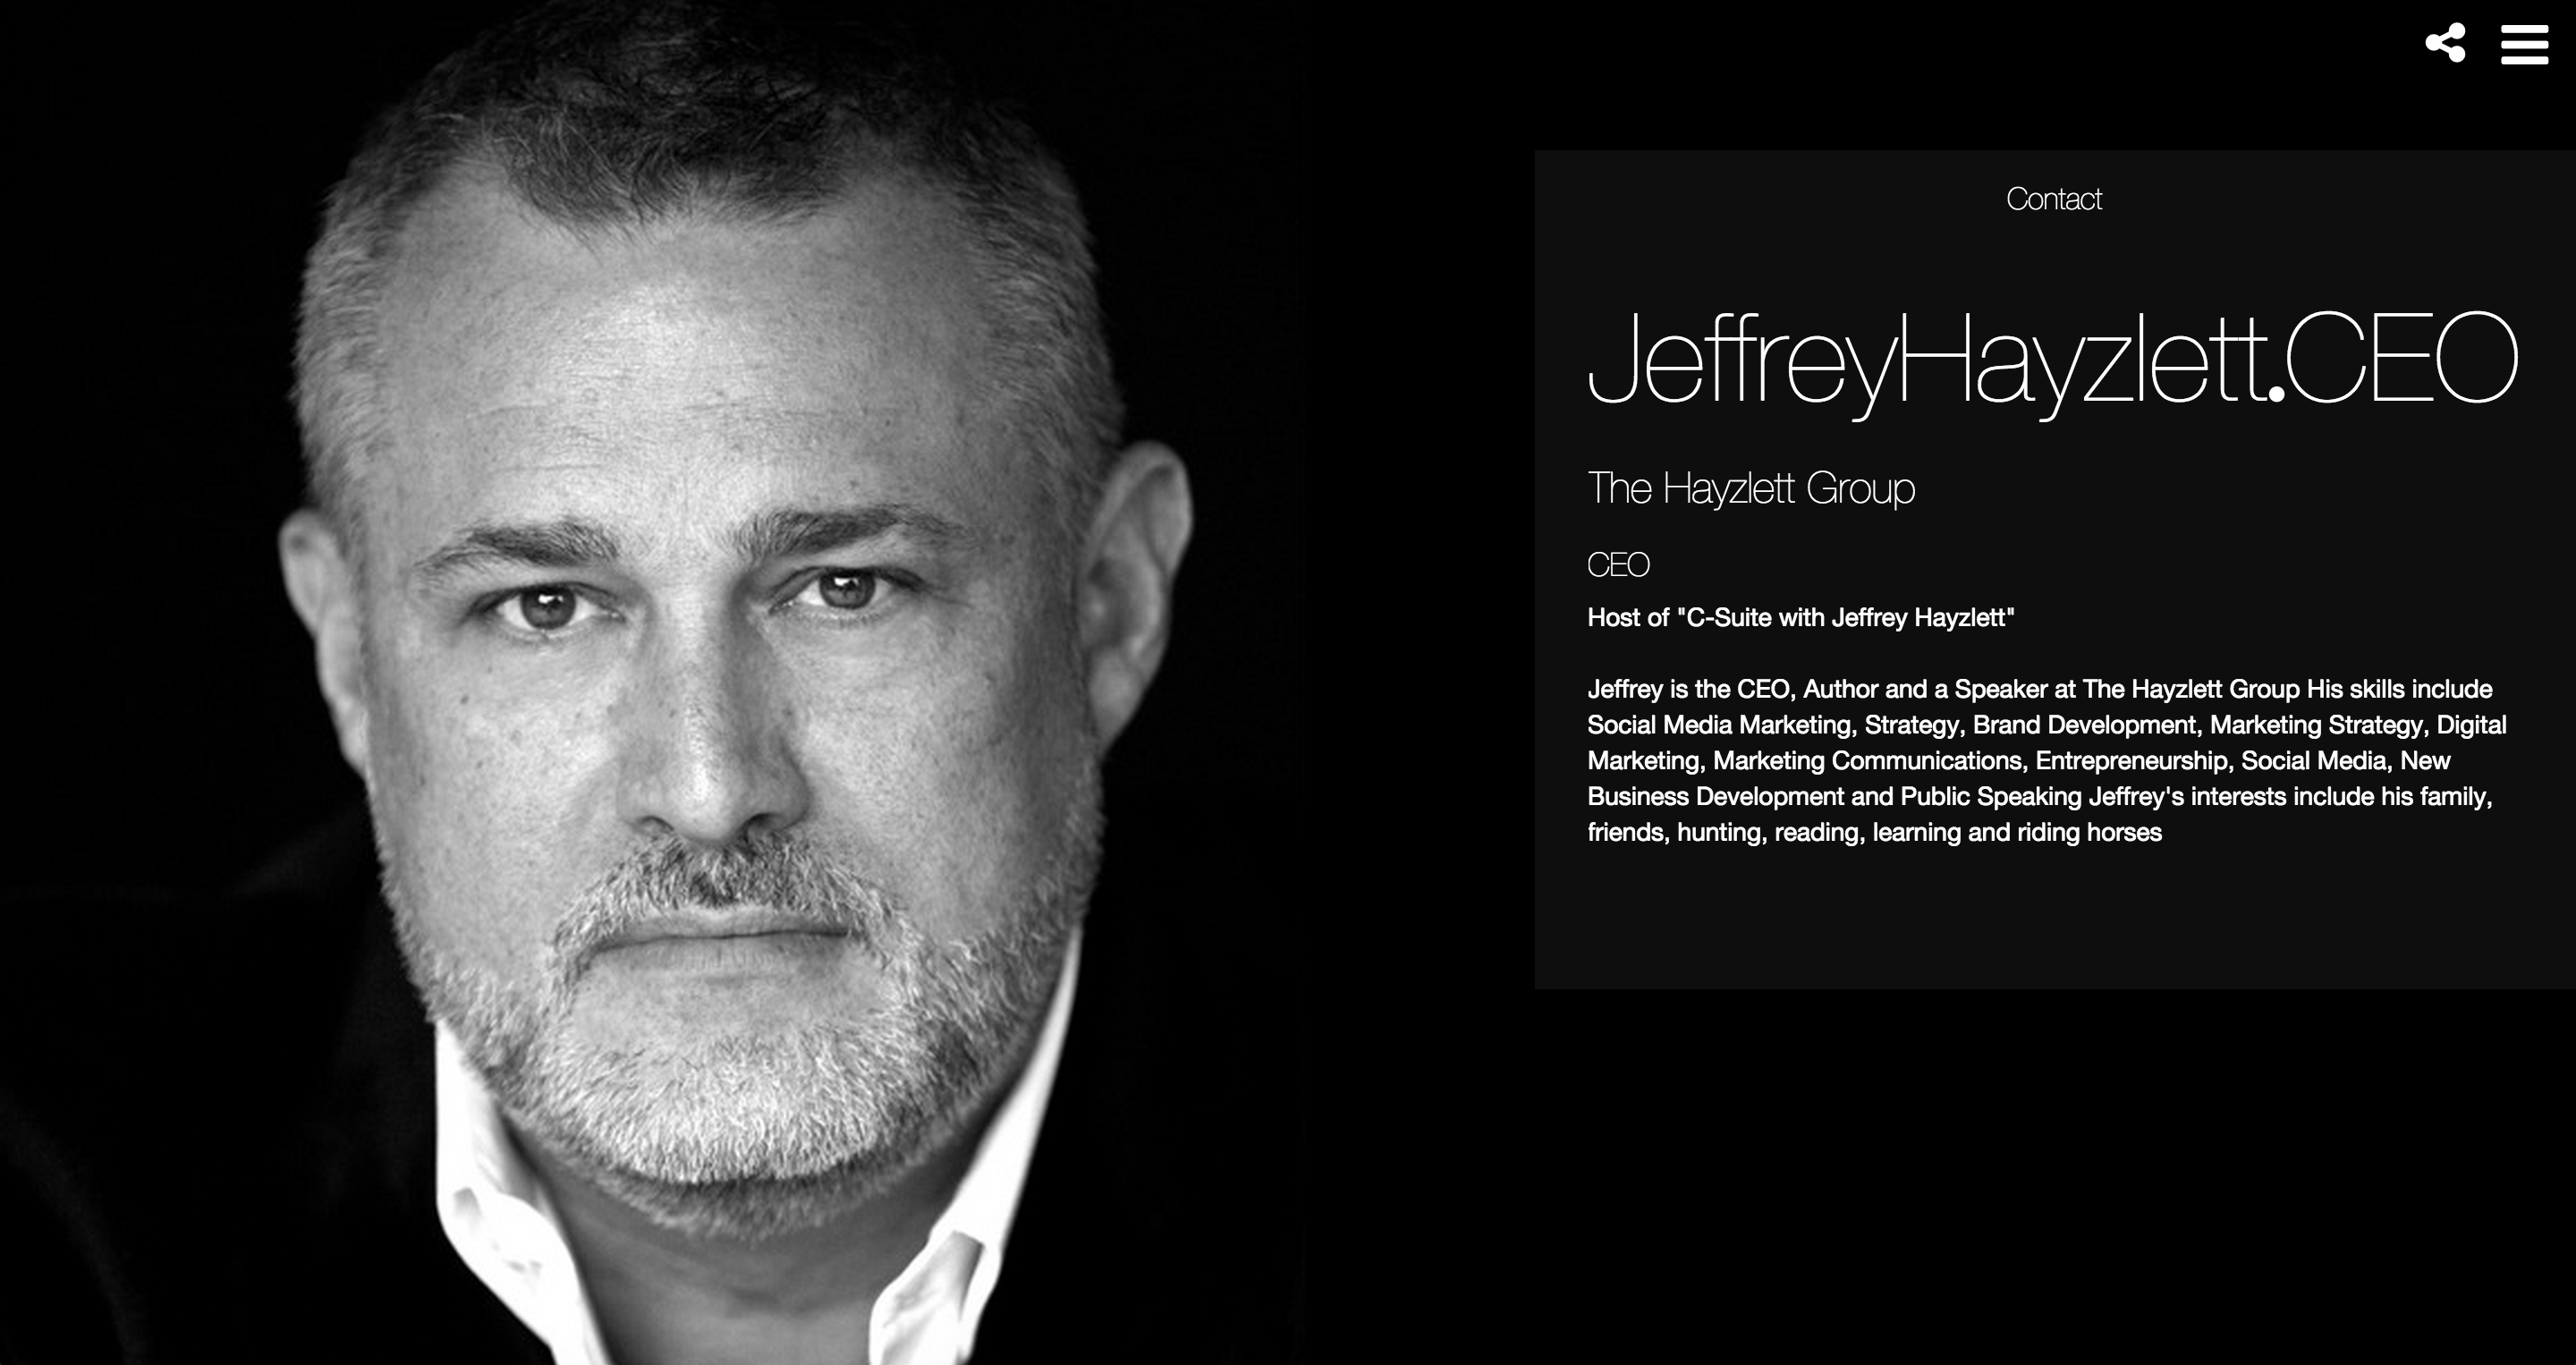 See Jeffrey's Chief Engagement Office profile at JeffreyHayzlett.CEO